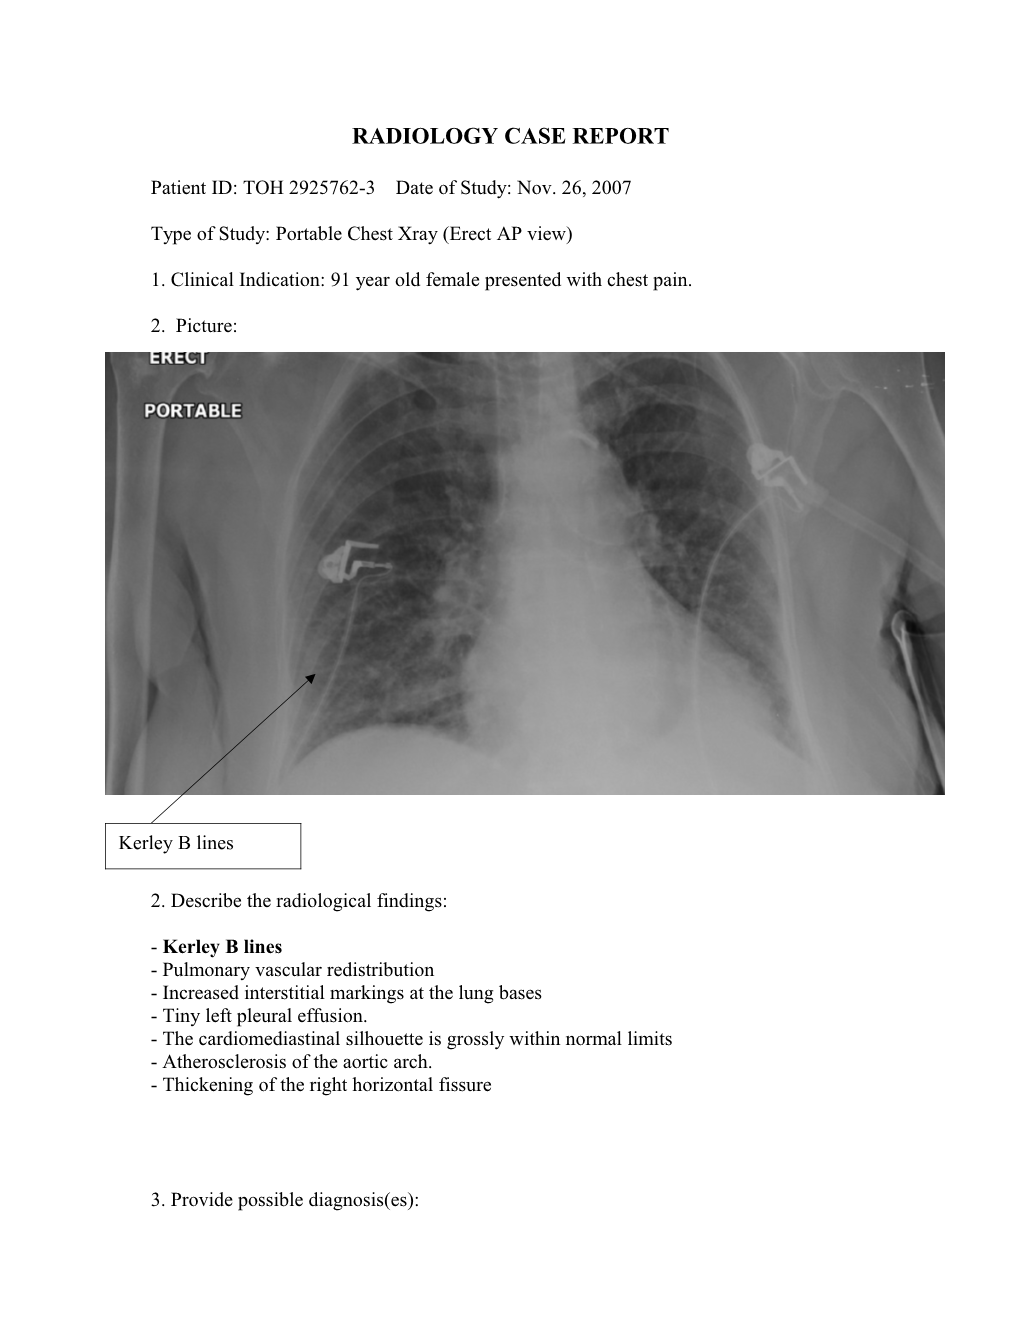 Radiology Case Report s4